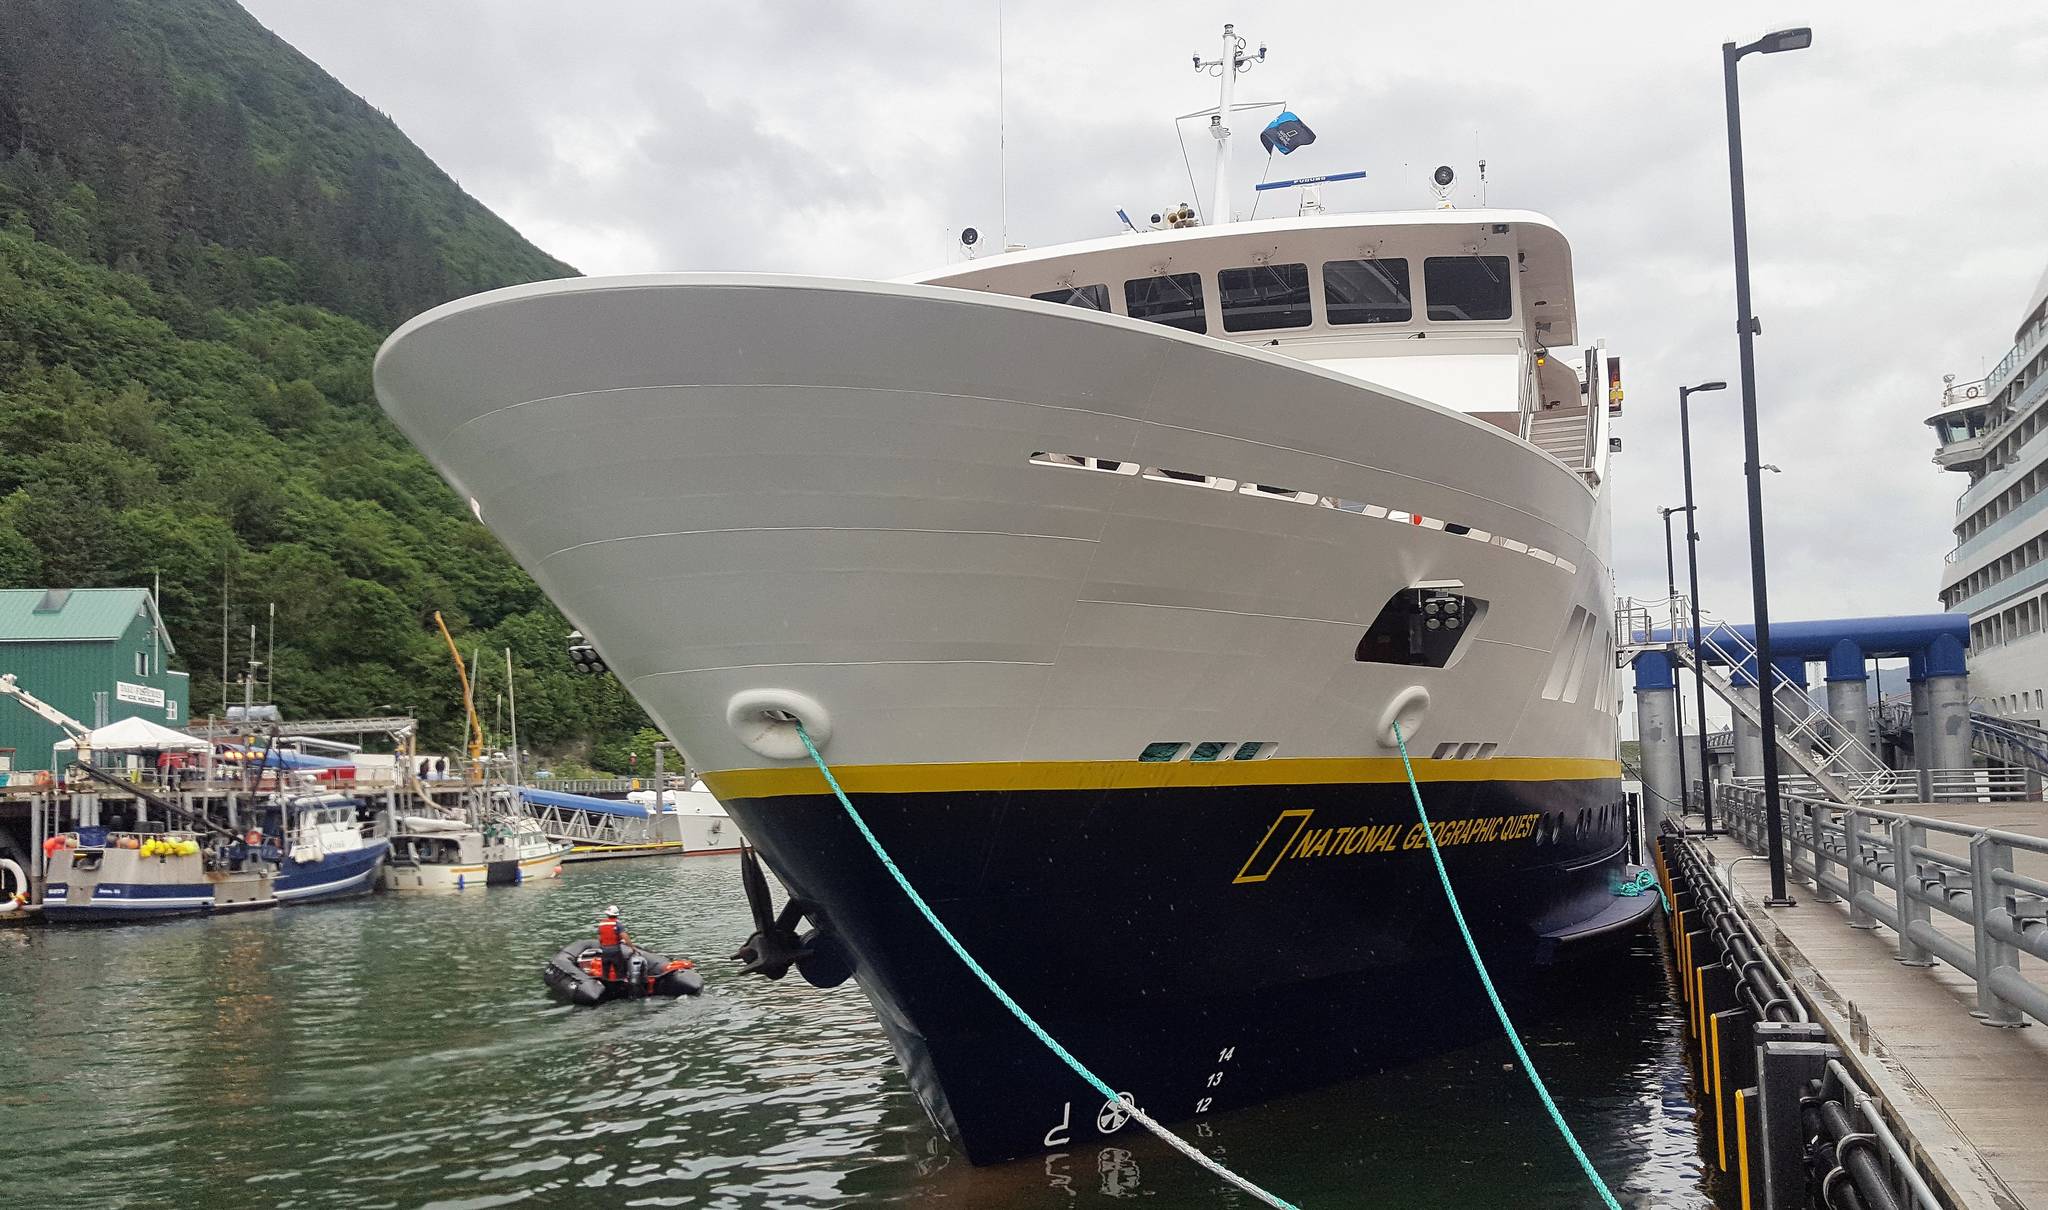 Lindblad Expeditions-National Geographic launches its new 100-guest expedition ship, National Geographic Quest, from Juneau on Saturday. (Liz Kellar | Juneau Empire)